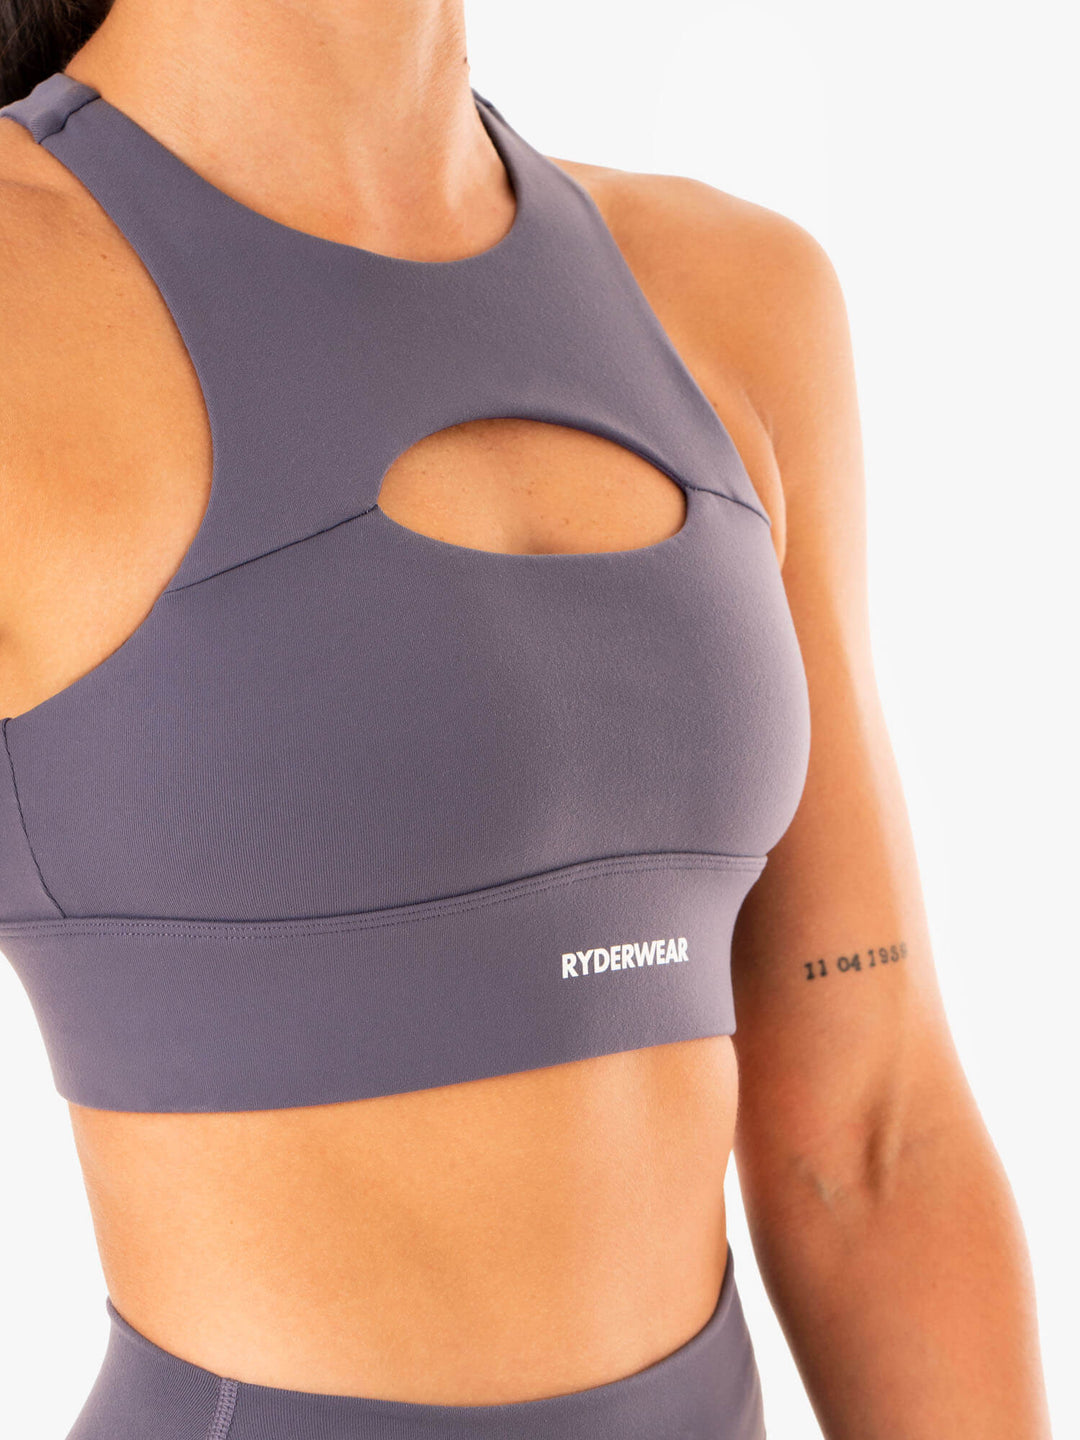 Replay Cut Out Sports Bra - Charcoal Clothing Ryderwear 